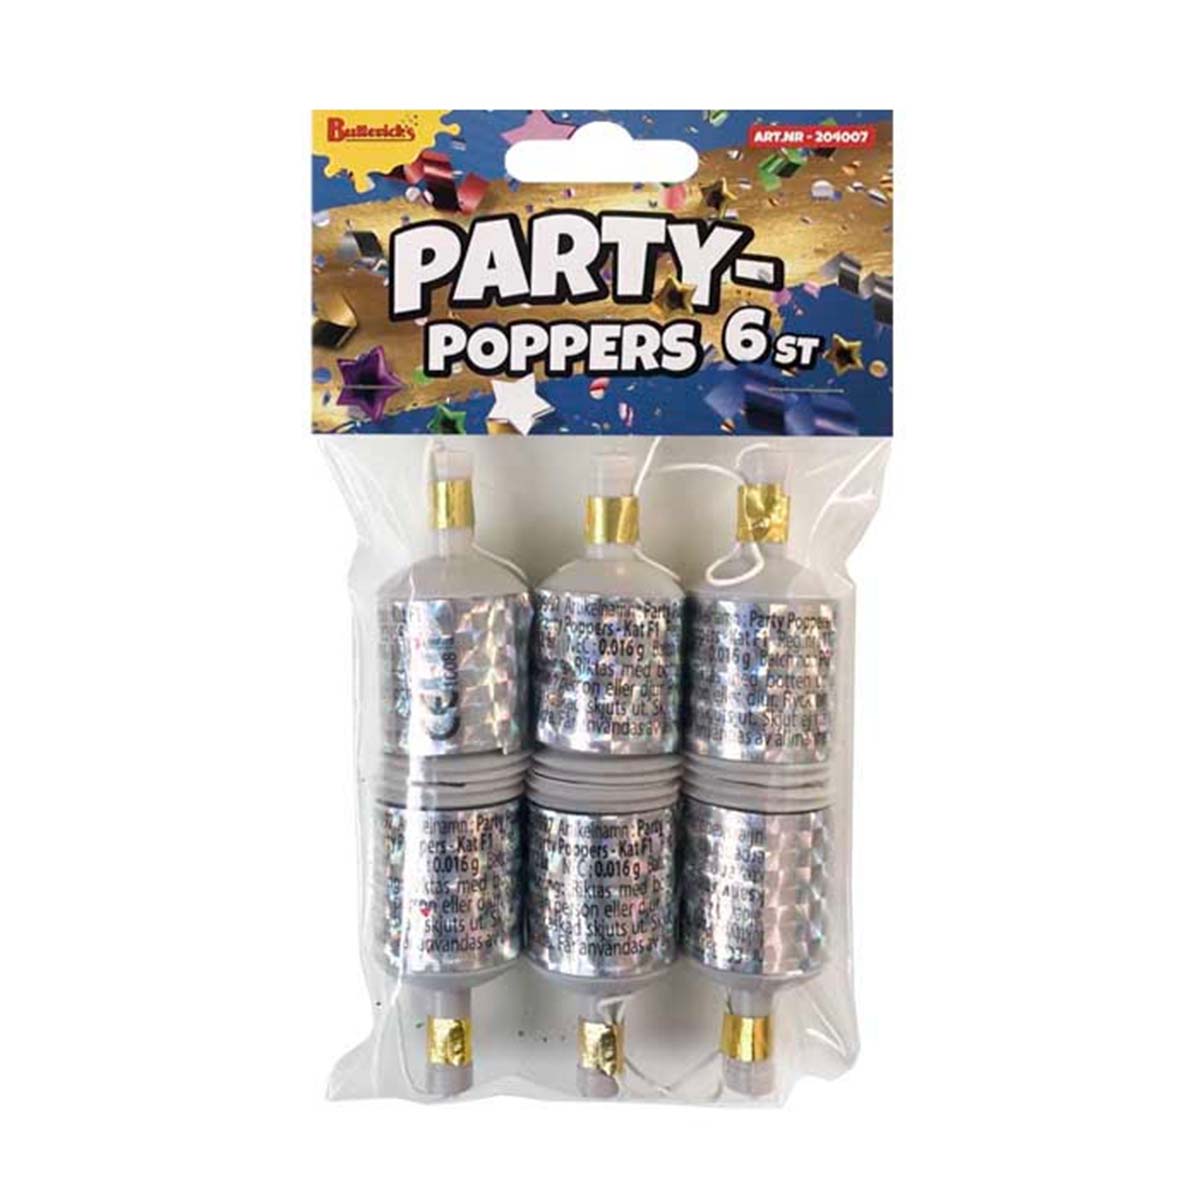 Partypoppers silver 6 st